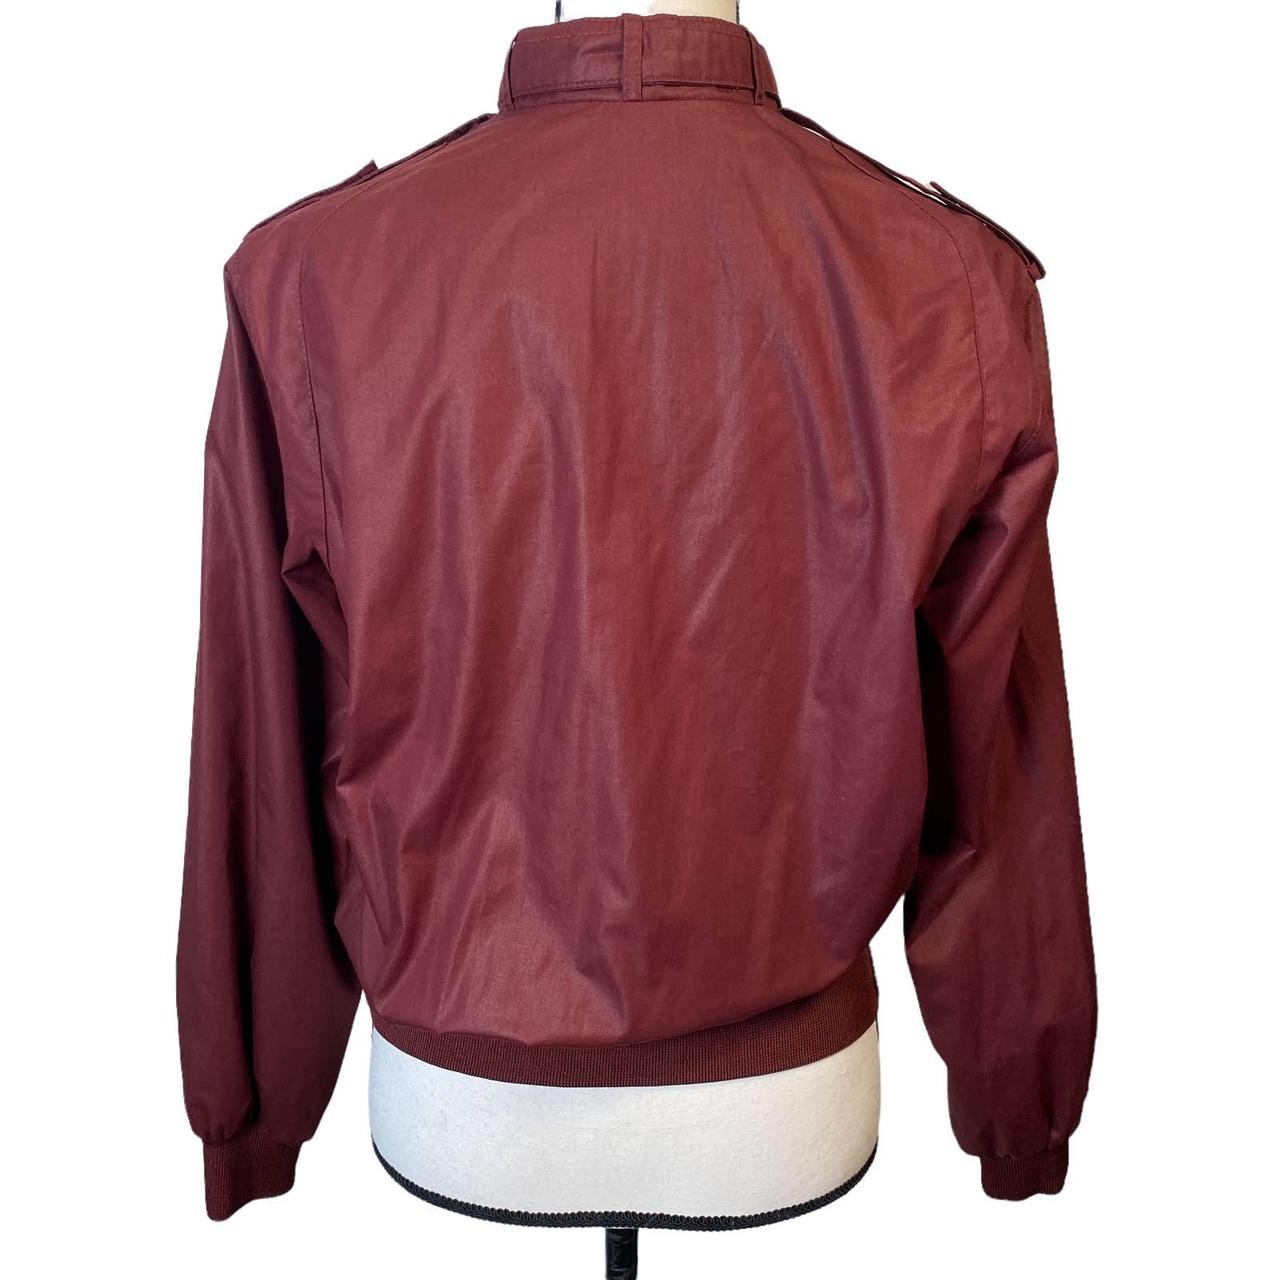 Product Image 2 - Members Only VTG 80's Jacket